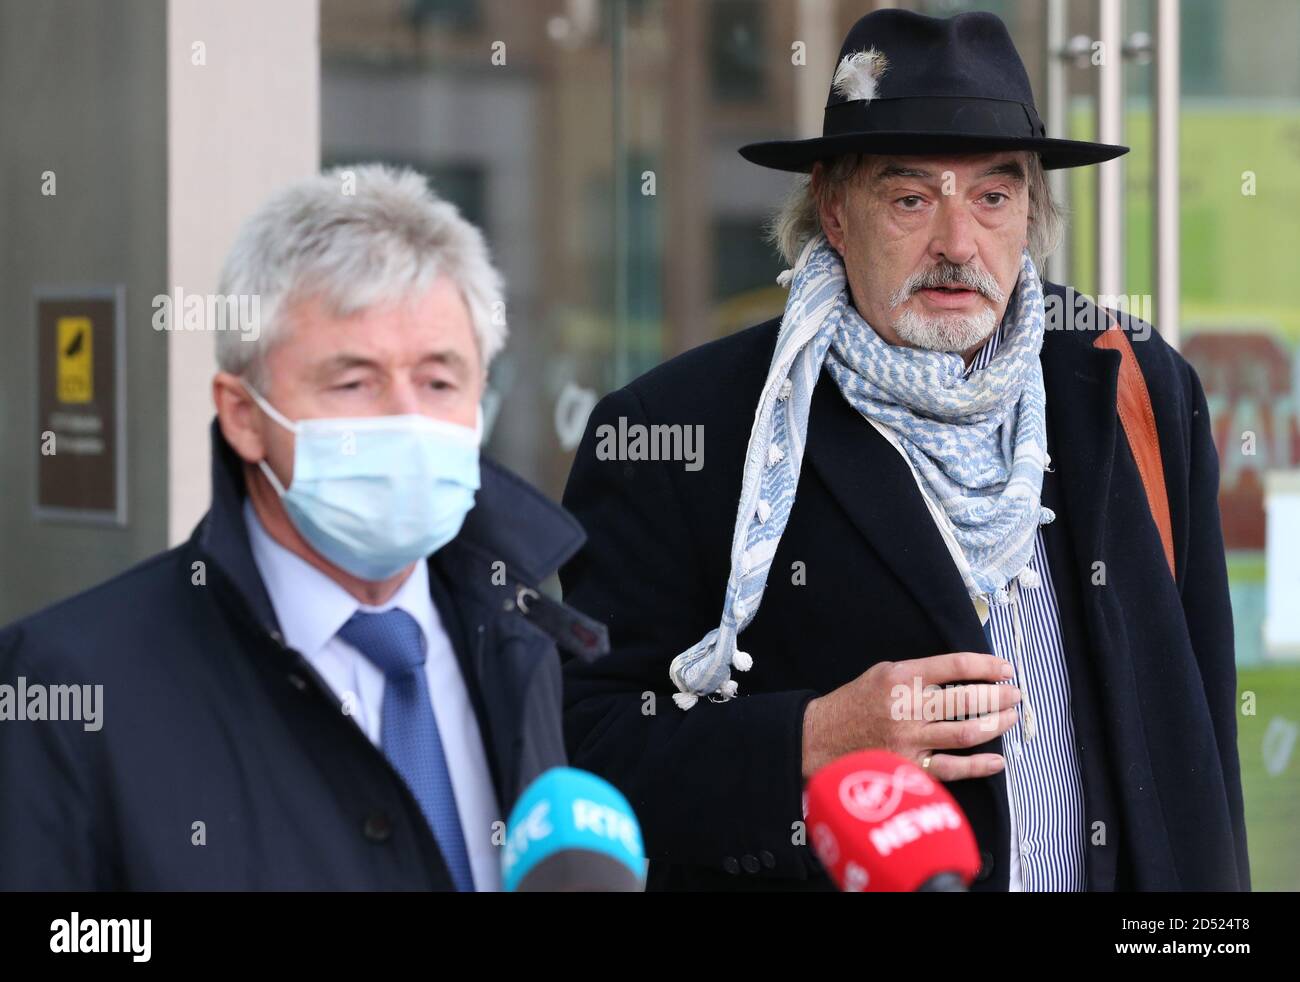 Dublin, Leinster, Ireland. 12/October/2020. Irish High Court refuses to extradite Ian Bailey to France for the murder of French citizen Sophie Toscan du Plantier in Ireland in 1996. Photo shows Ian Bailey (right) outside the court with his solicitor, Frank Buttimer, after the decision. Mr Bailey has already been found guilty of the murder, in his absence, by a French Court. Mr Bailey has alway denied the murder. Photo: Sasko Lazarov/RollingNews.ie Credit: RollingNews.ie/Alamy Live News Stock Photo